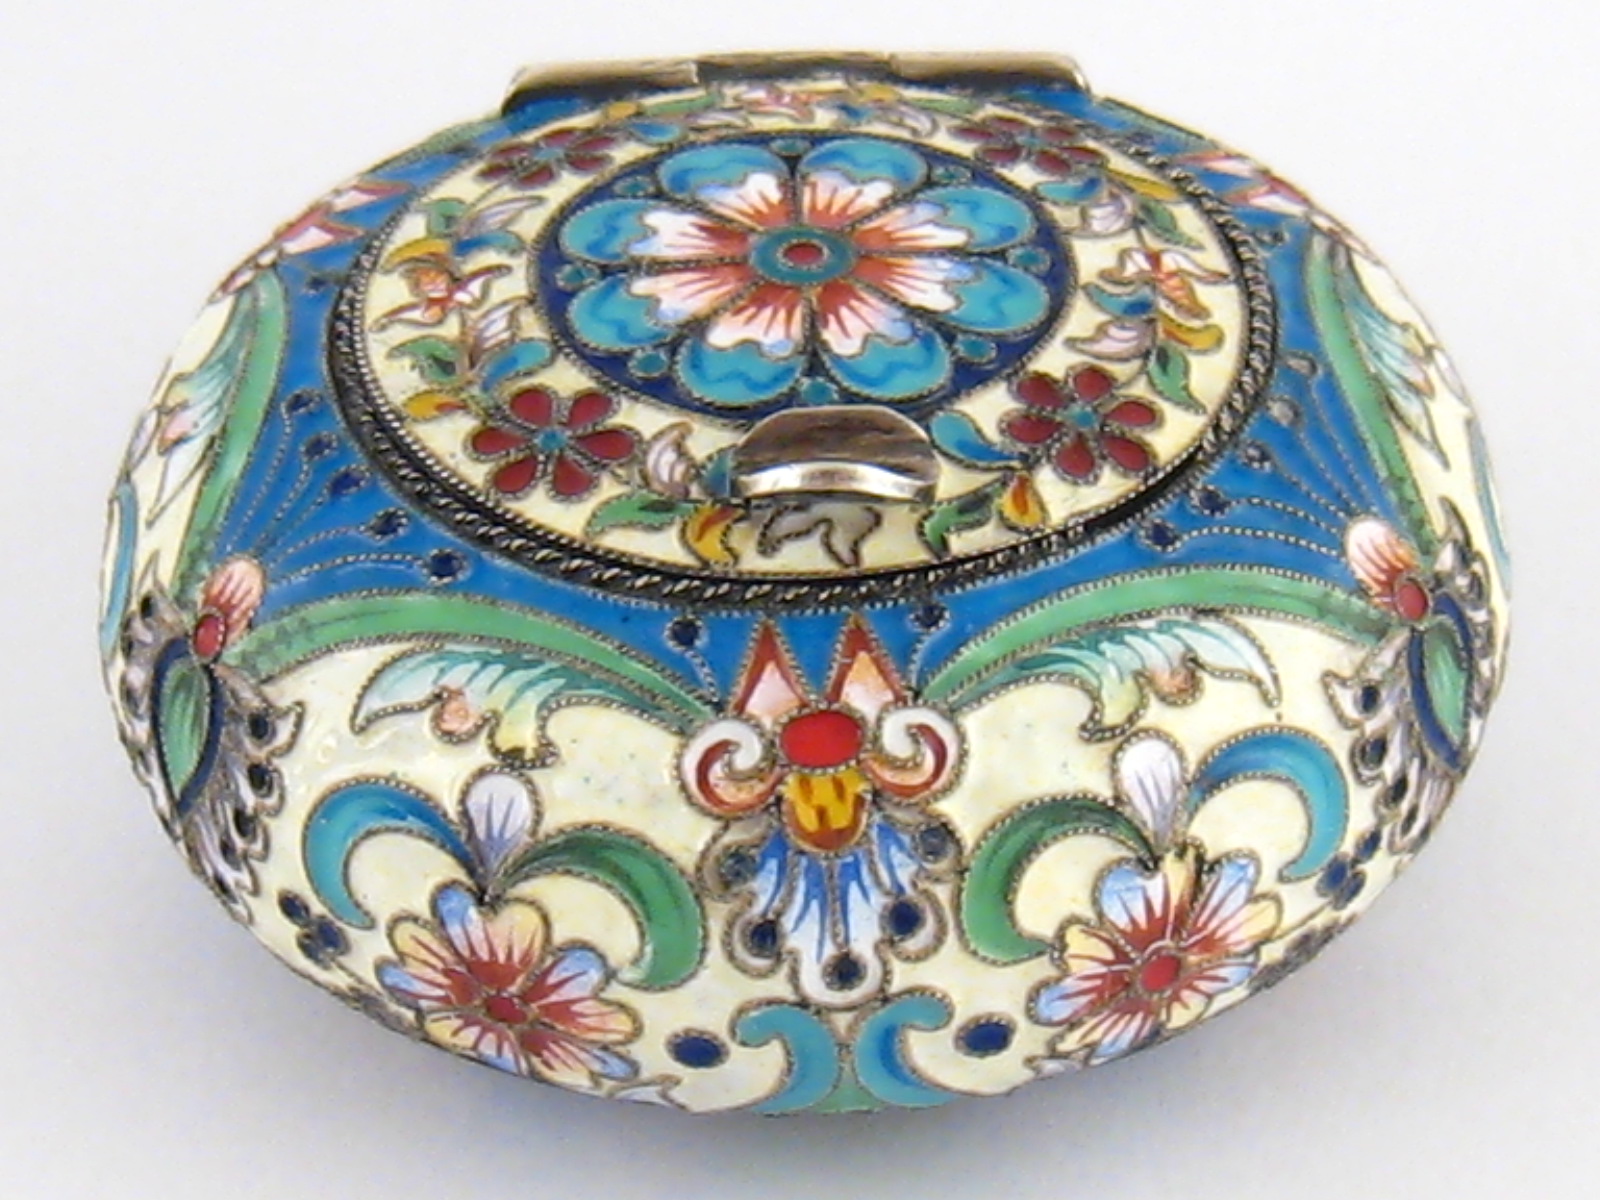 A cloisonne shaded enamel silver box of flattened globe shape in the Russian style, 84 mark only